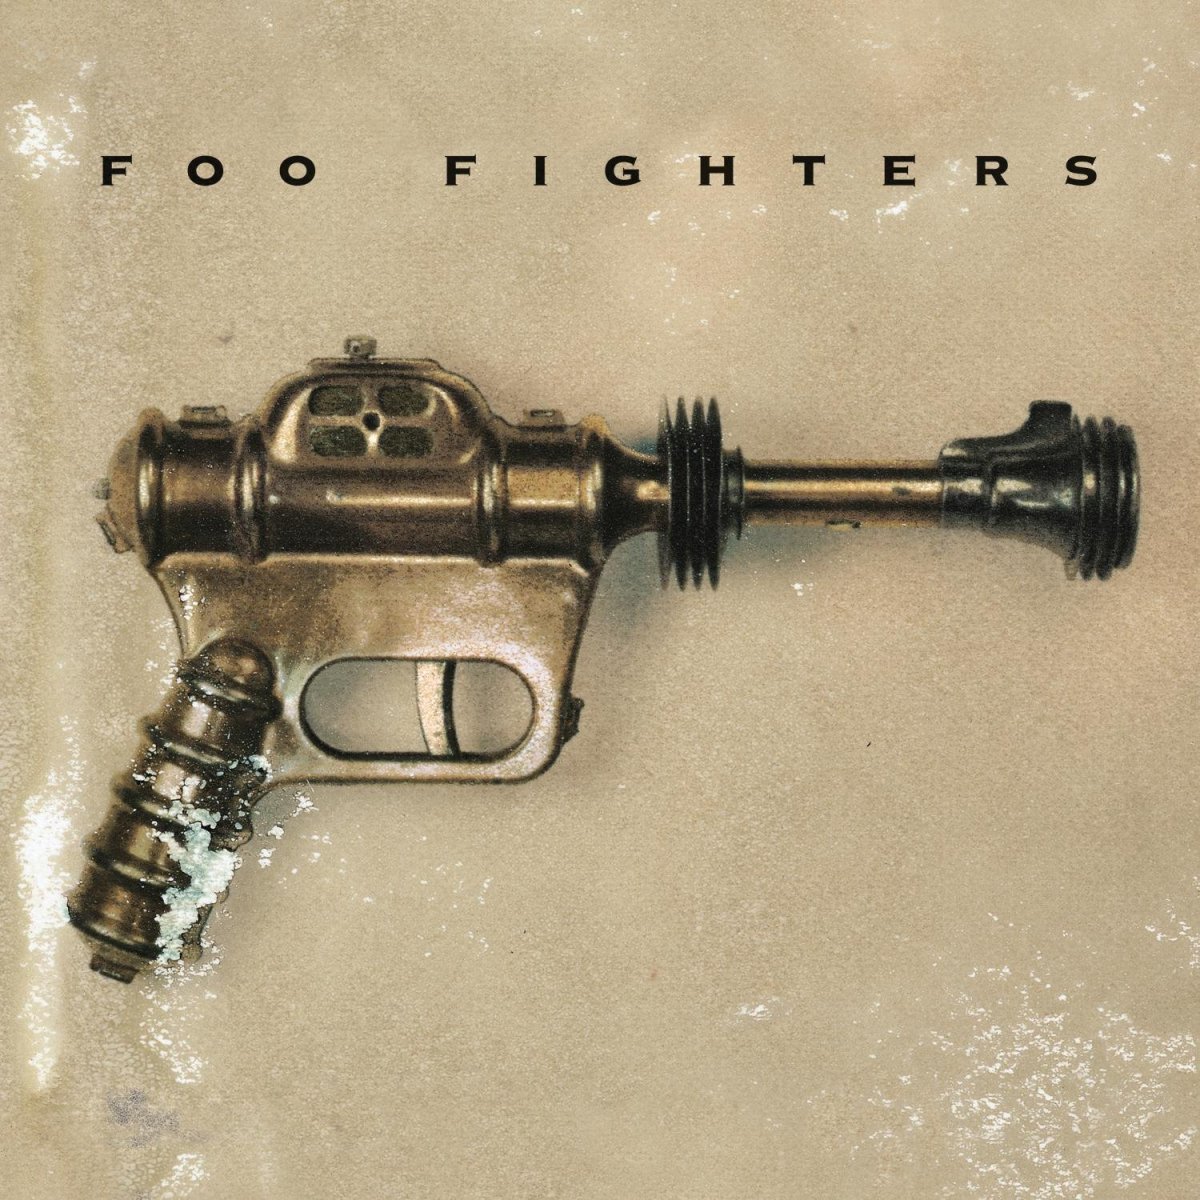 A Review of the First Foo Fighters Album Called "Foo Fighters